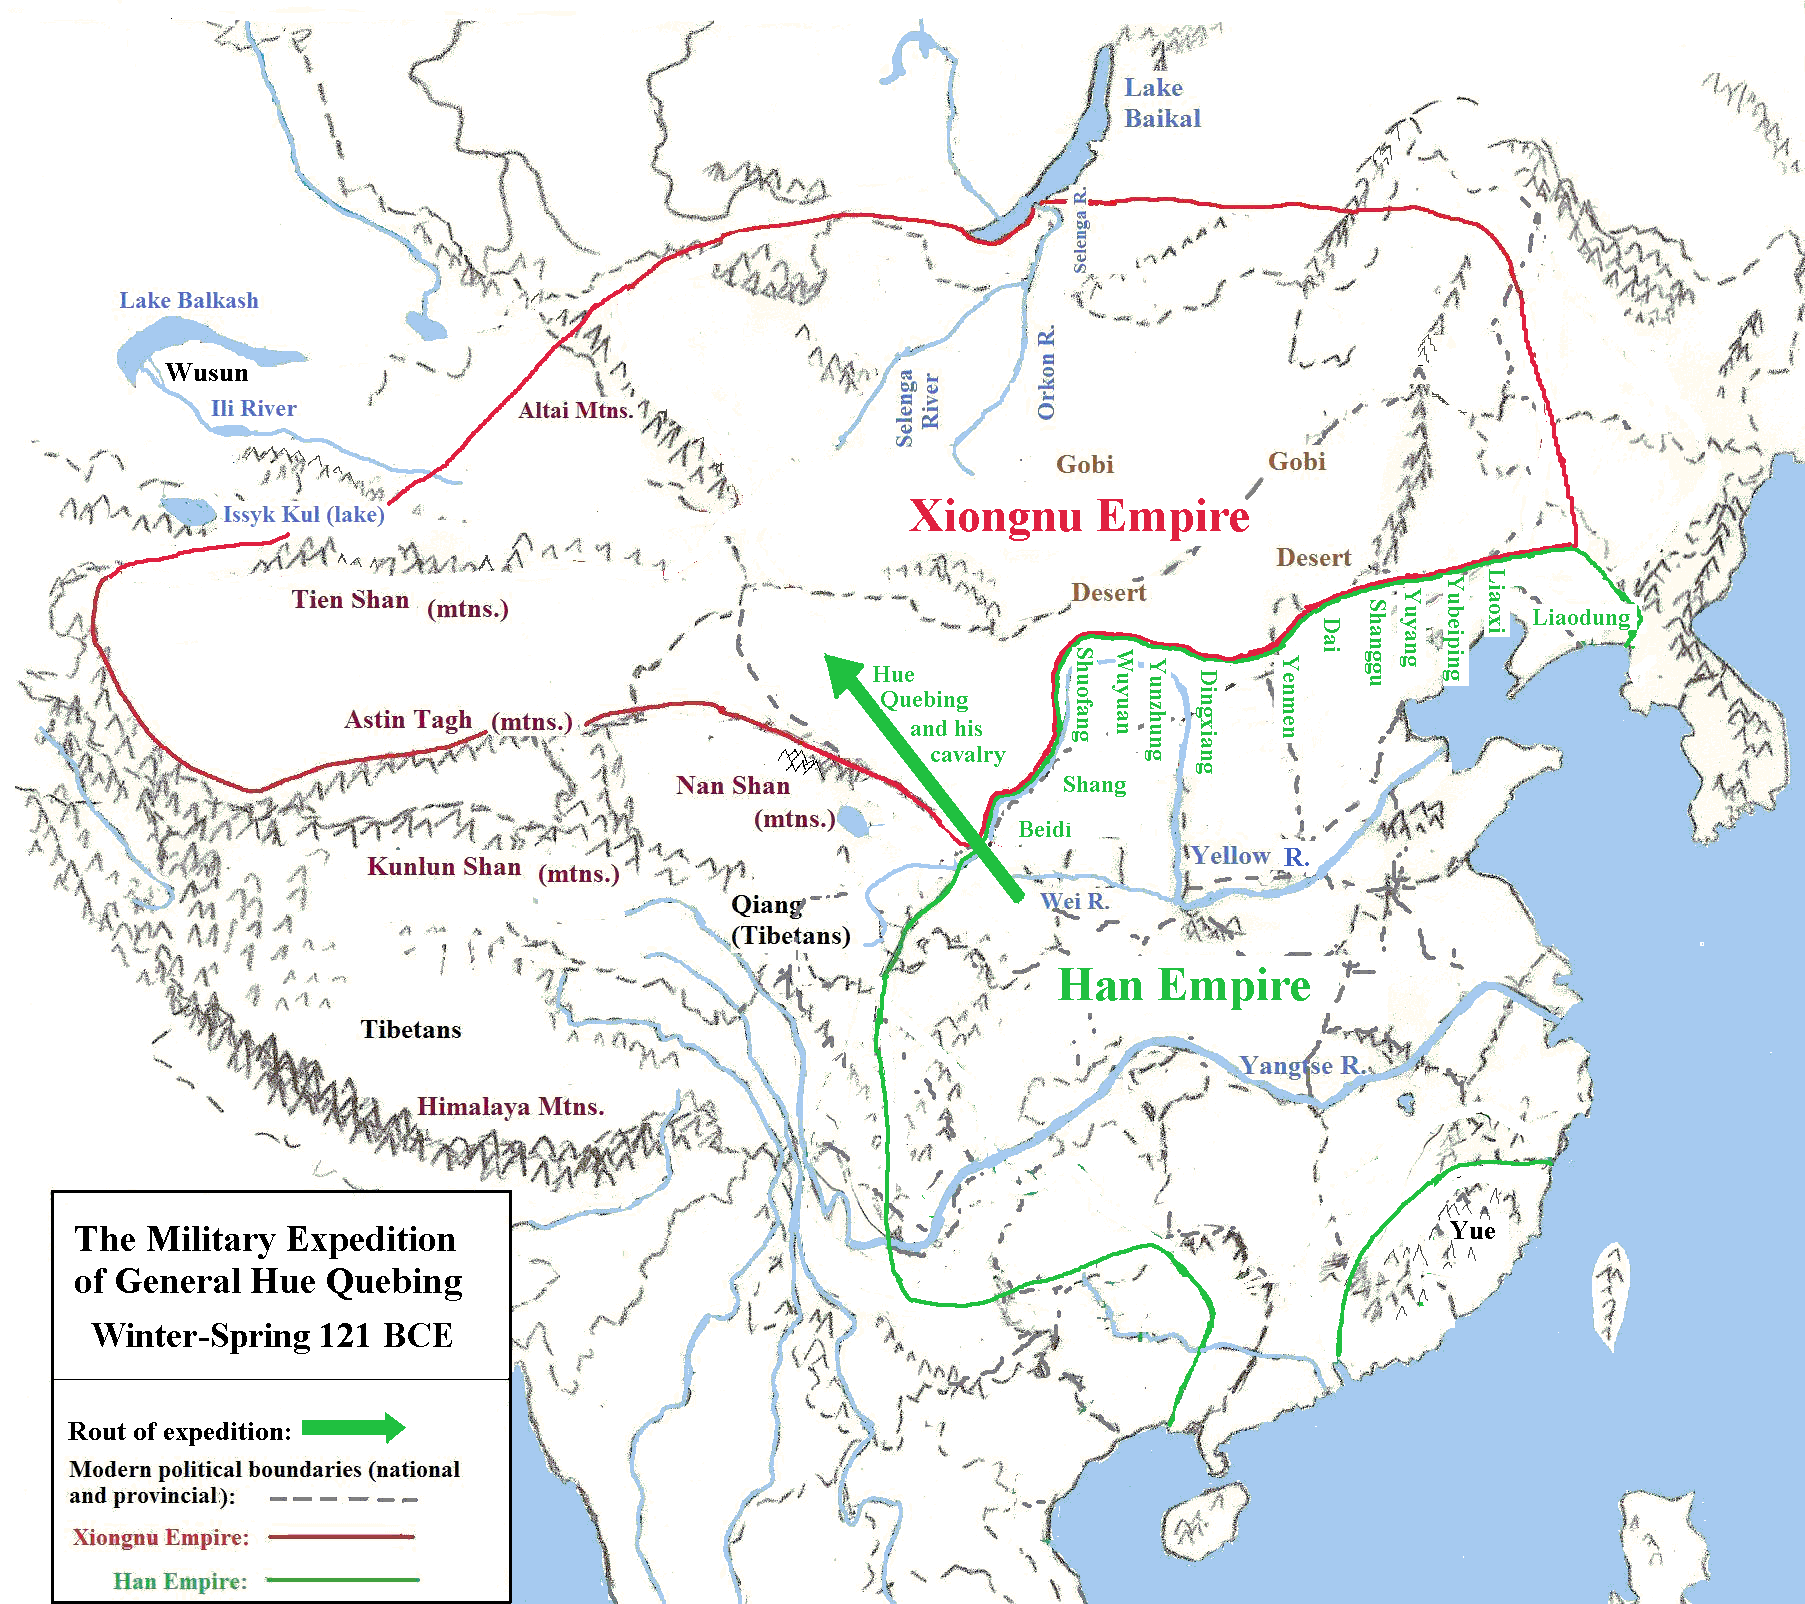 Map showing Chinese military expedition in winter to spring 121 BCE